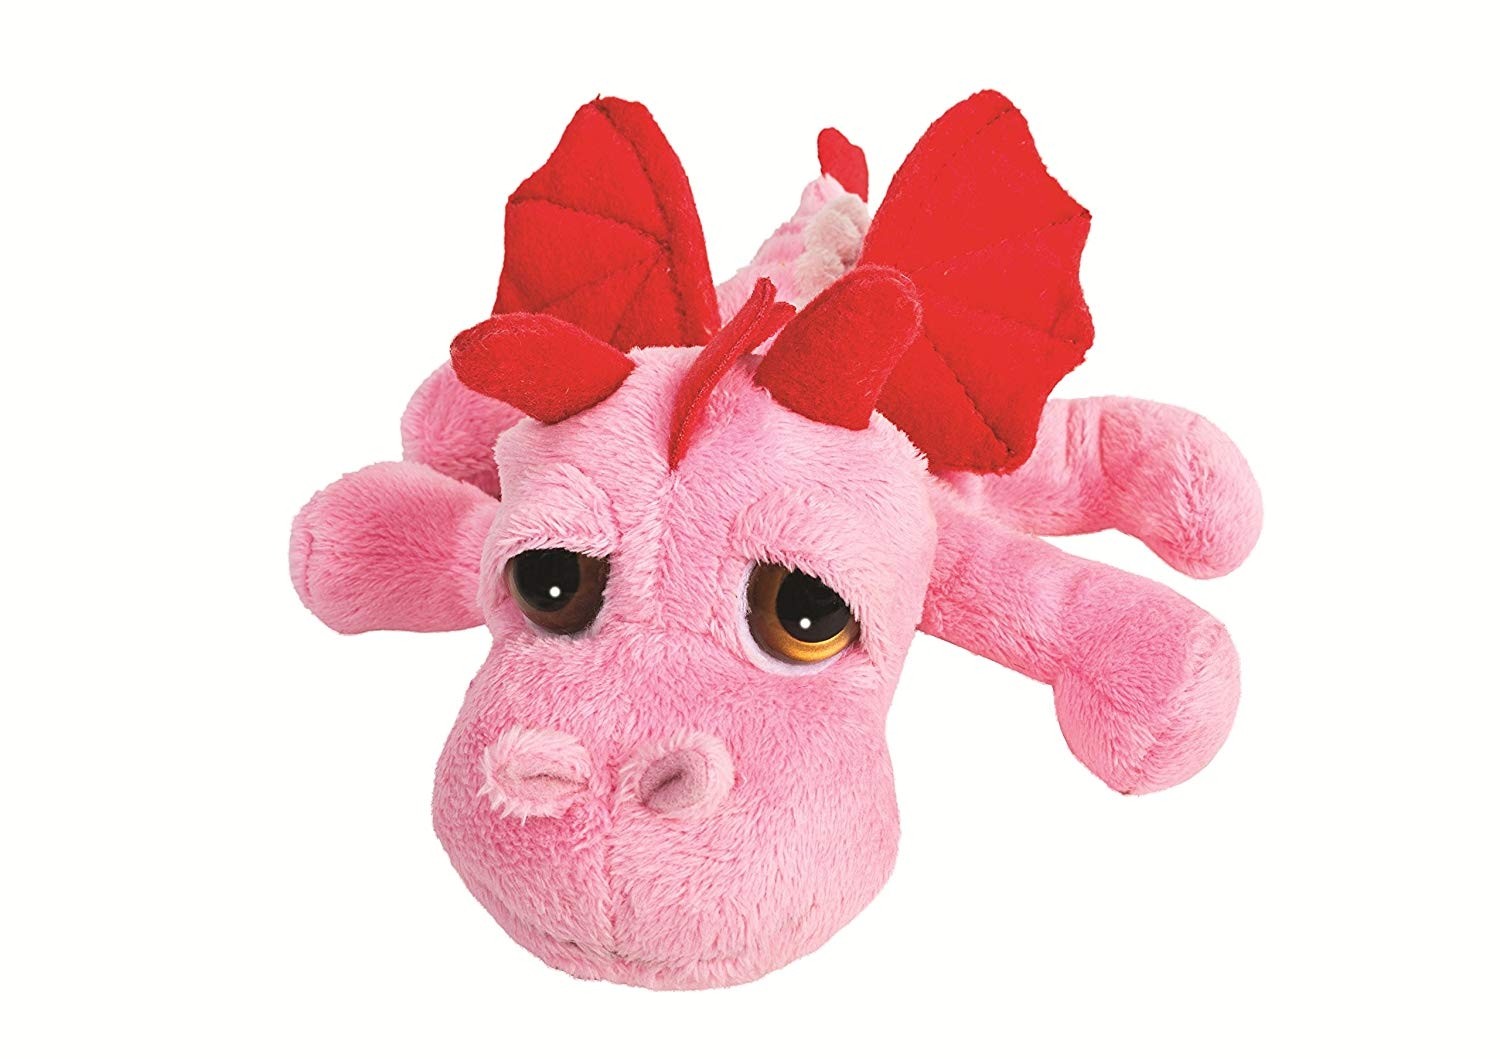 Suki Gifts Little Peepers Dragons Smoulder Dragon Soft Boa Plush Toy from the Dragonz range